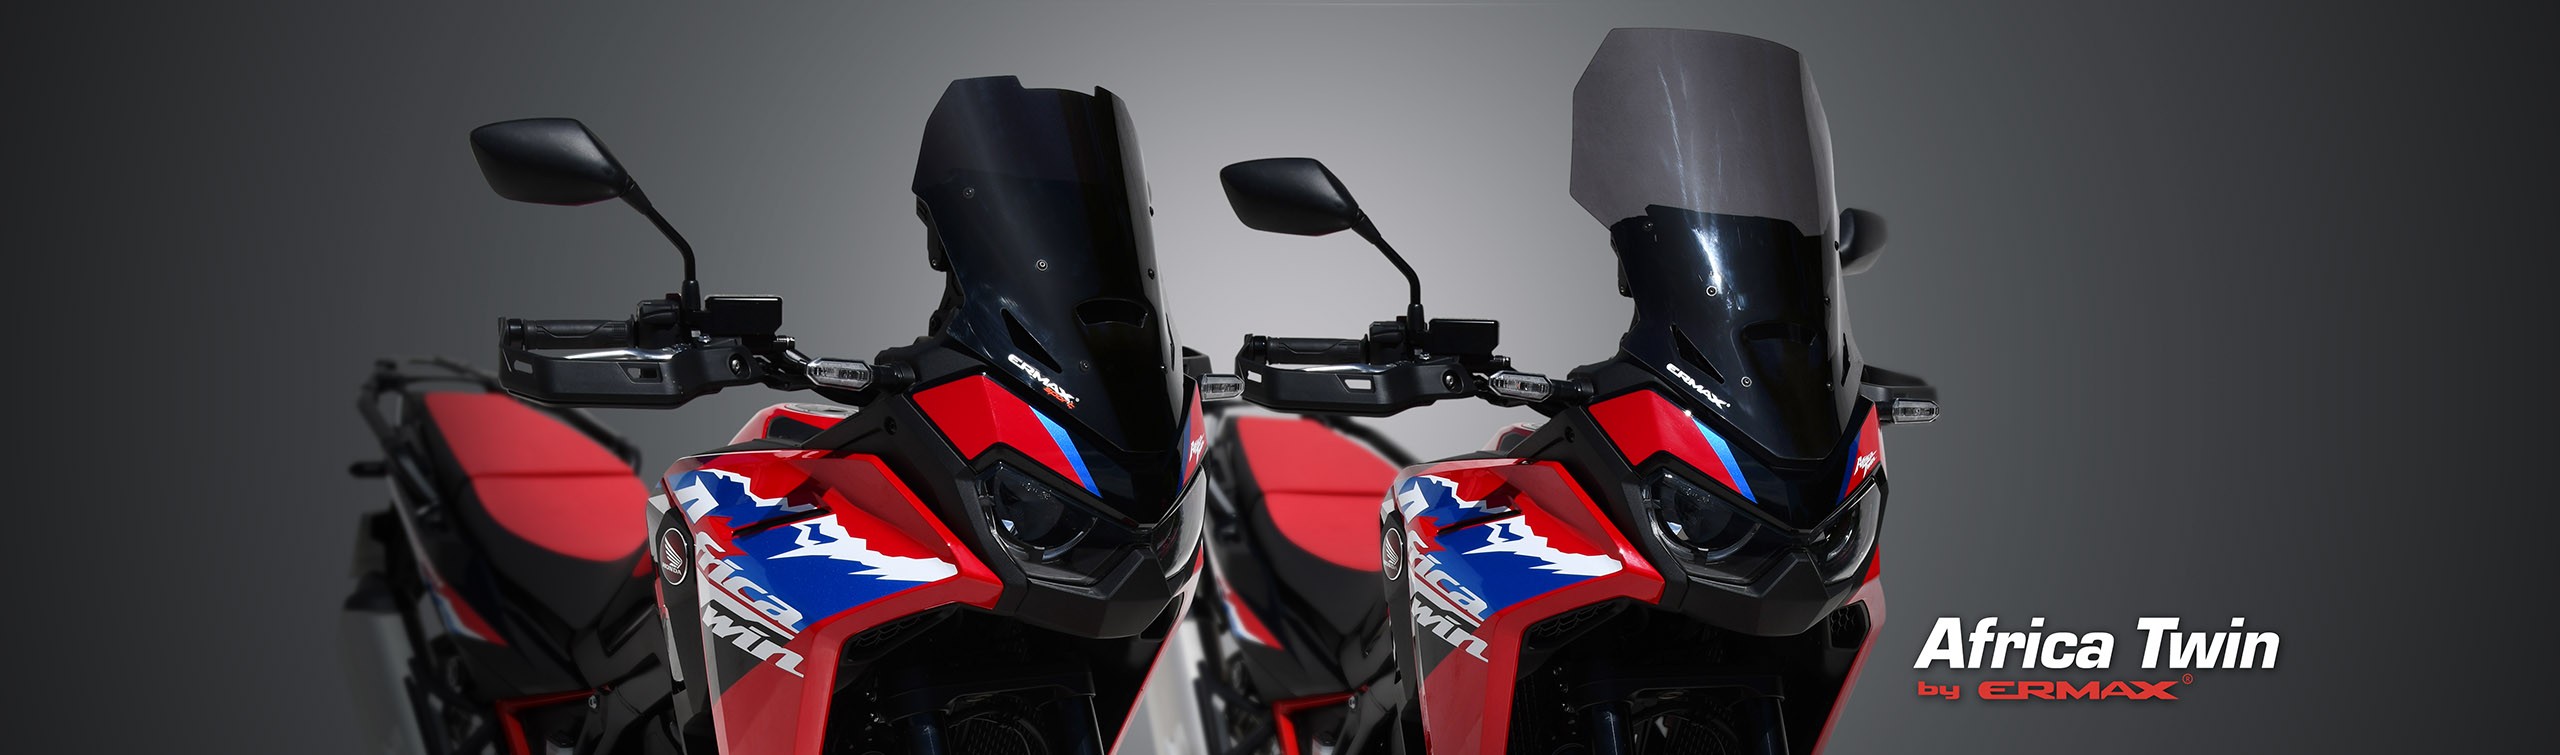 Africa Twin CRF 1100 L by Ermax